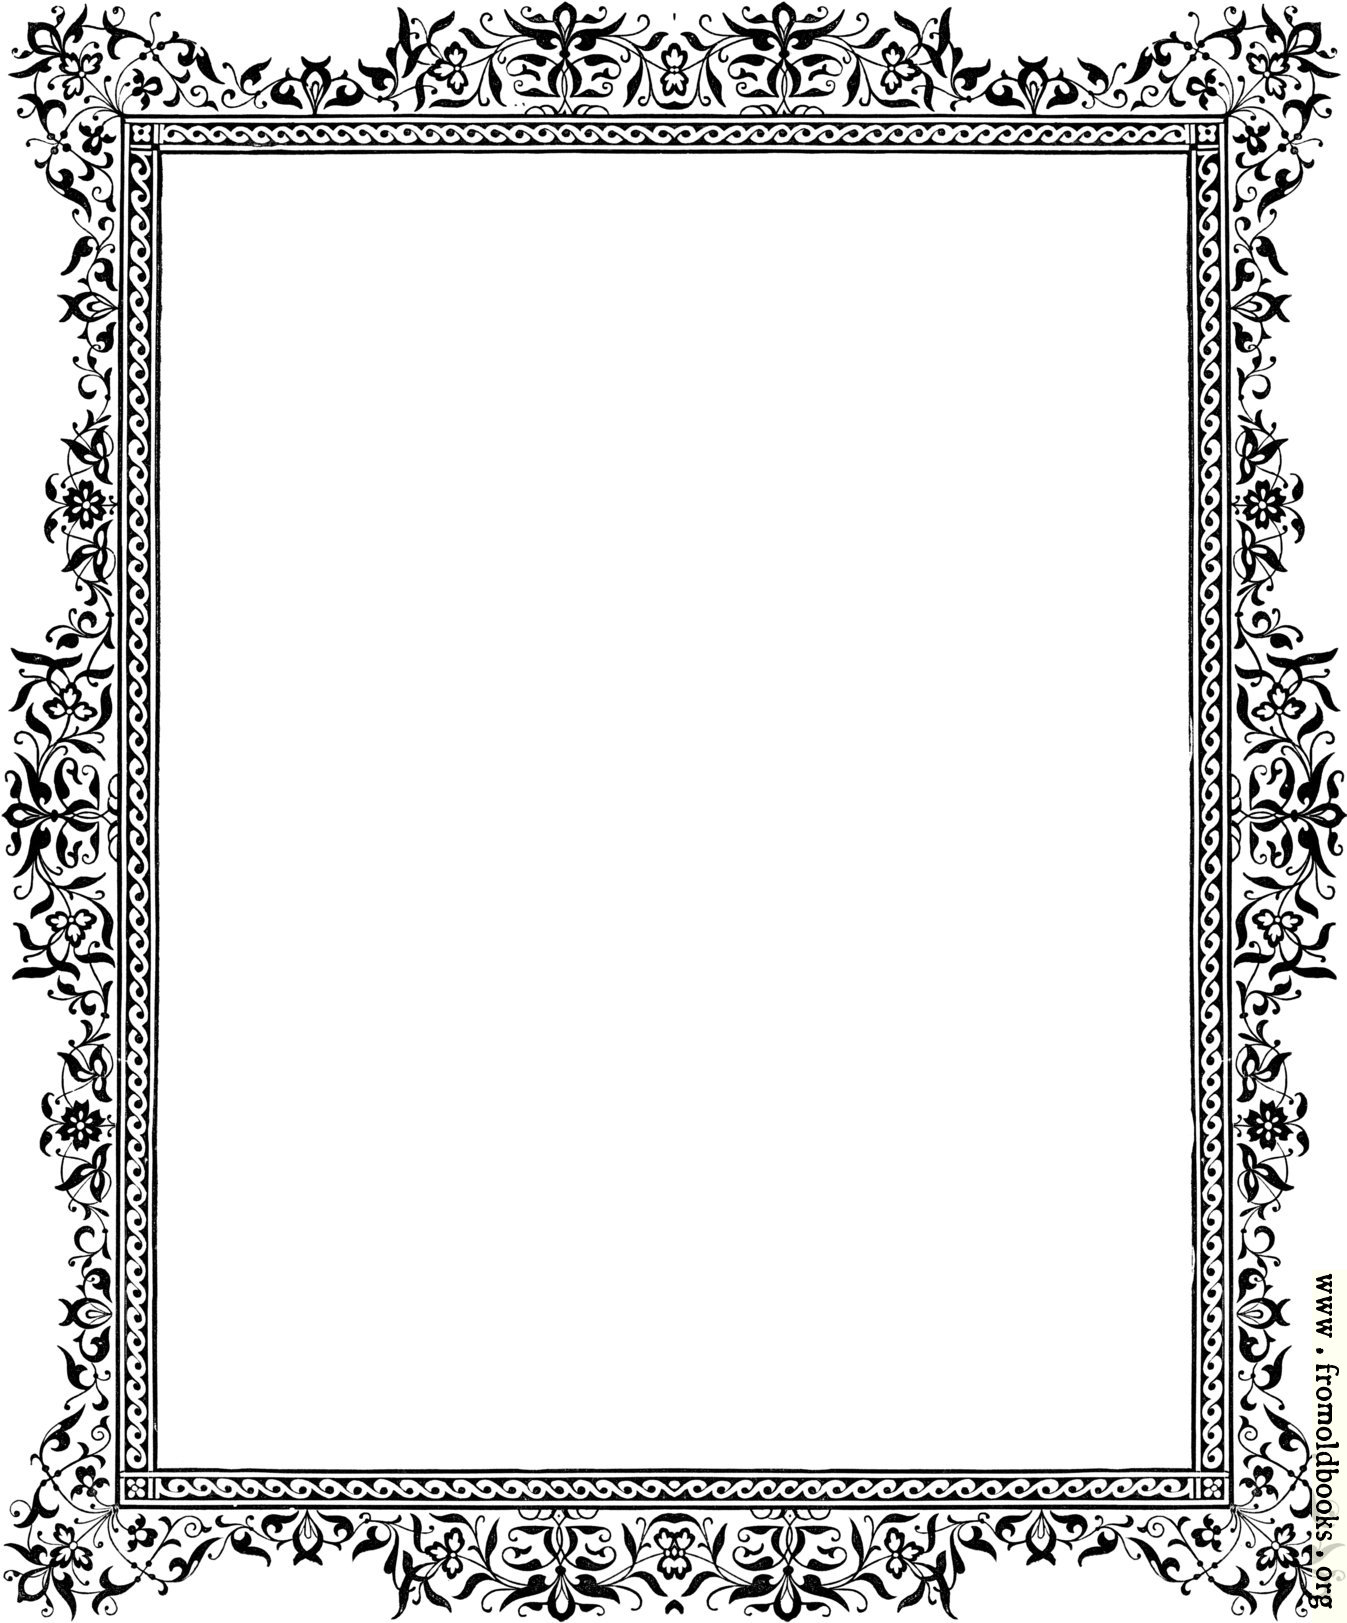 page borders clip art free download